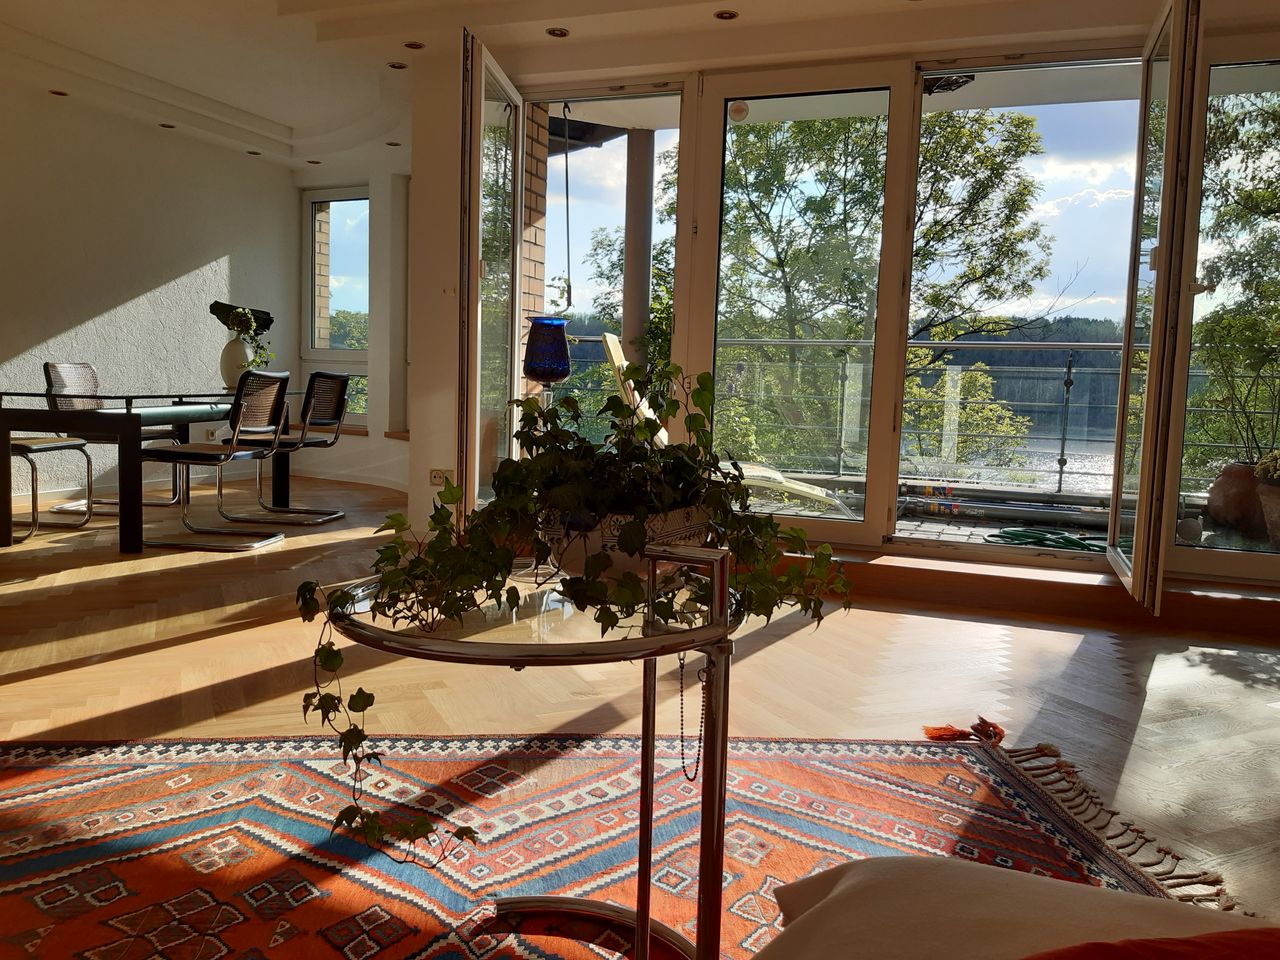 Luxurious and spacious 2 room dream apartment directly on the Rhine - Cologne